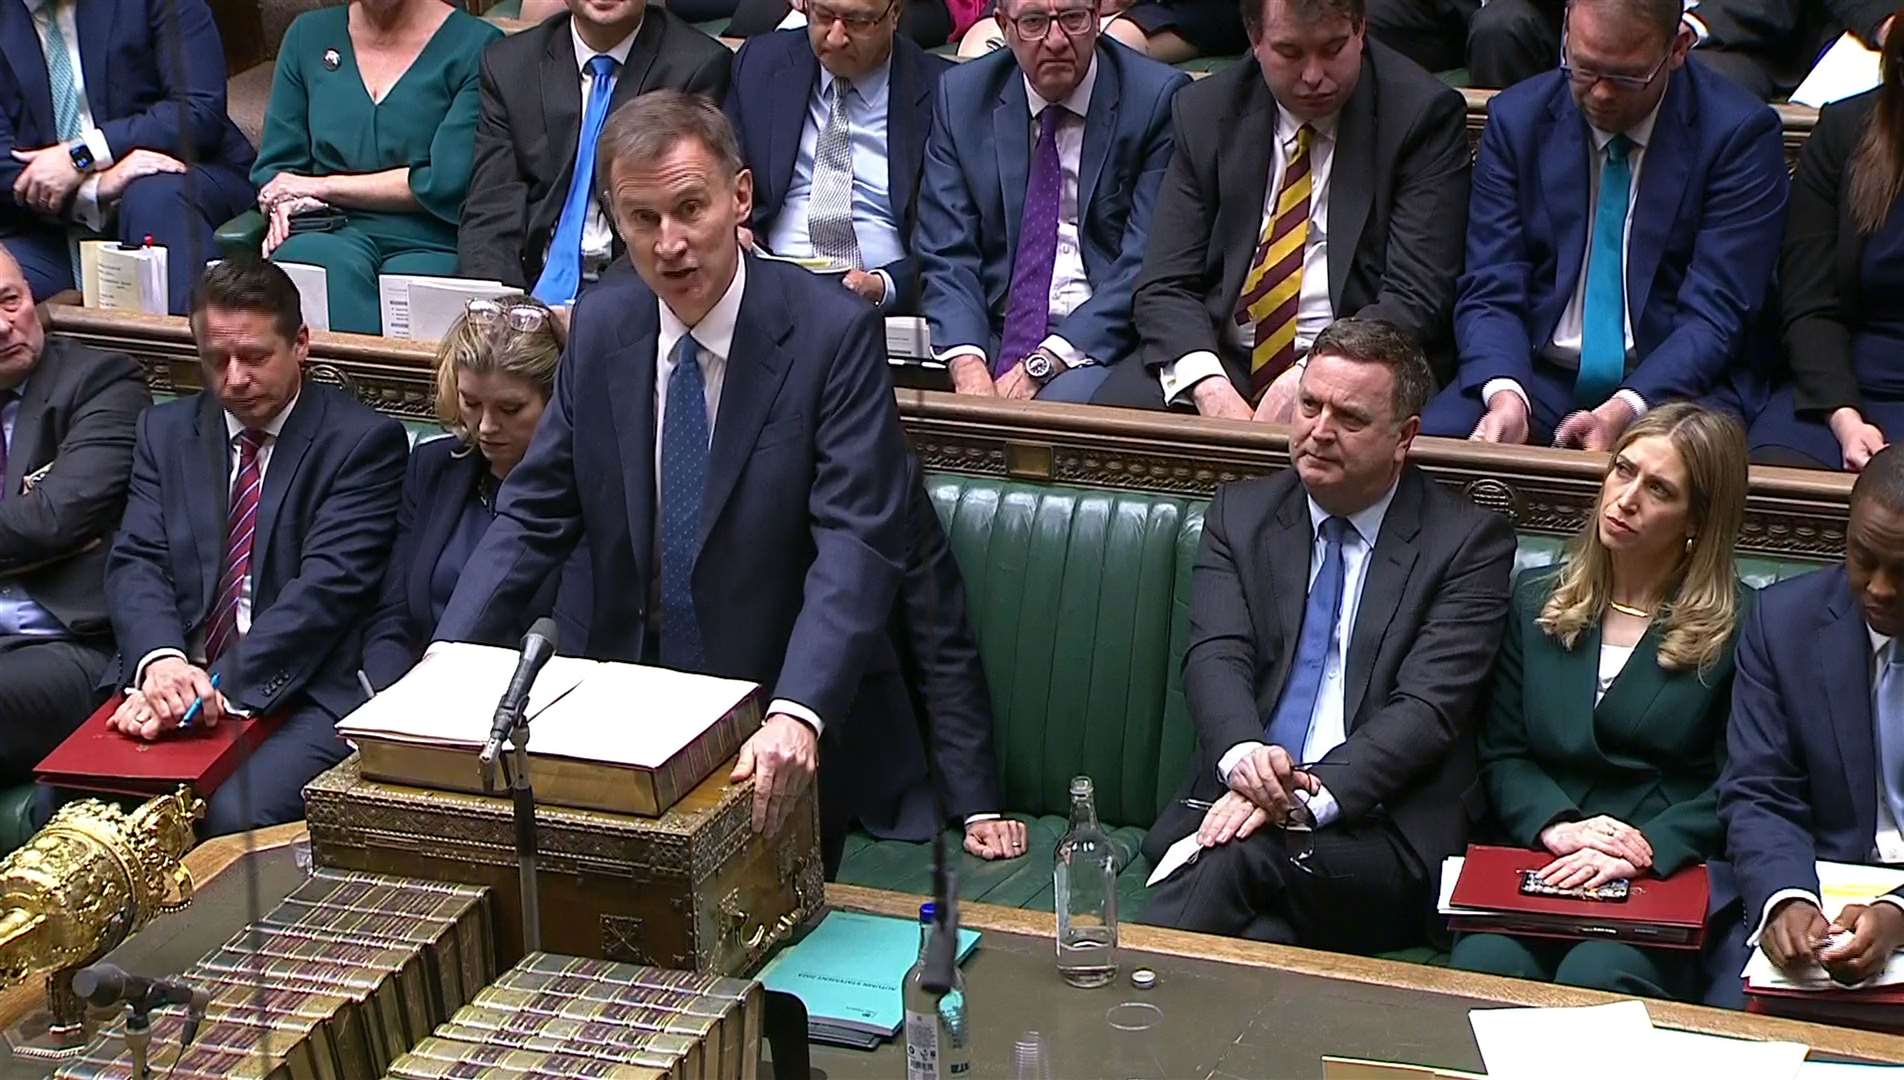 Chancellor Jeremy Hunt delivered his autumn statement in the House of Commons (House of Commons/UK Parliament/PA)